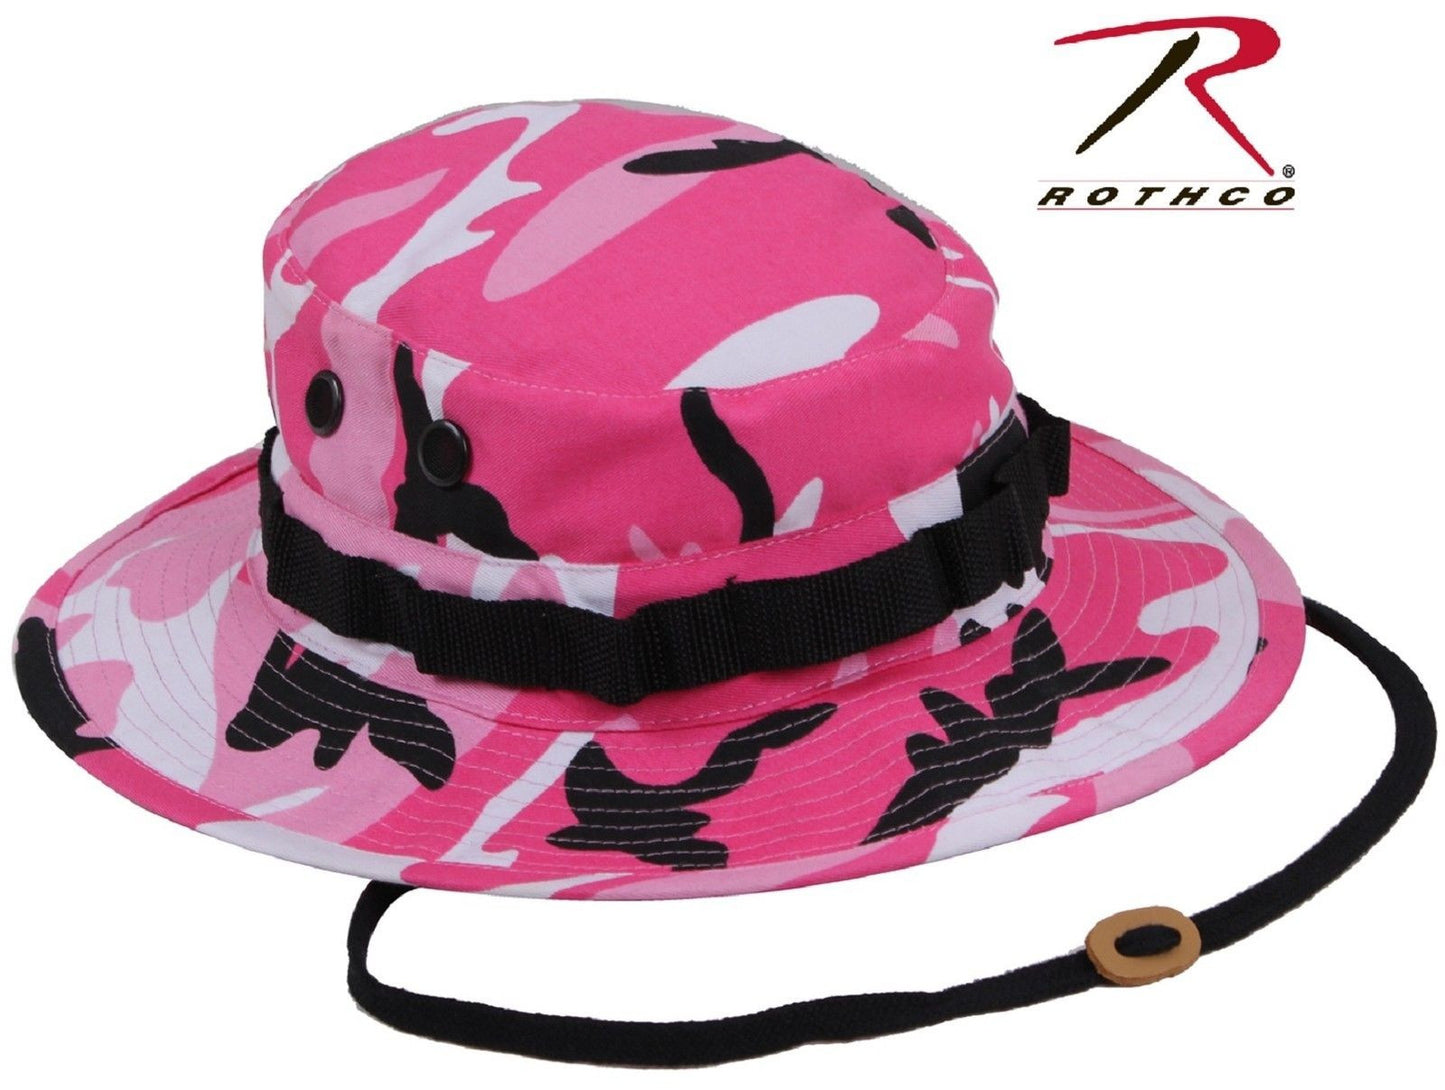 Pink Camouflage Boonie Hat - Rothco Boonies w/ Chin Strap